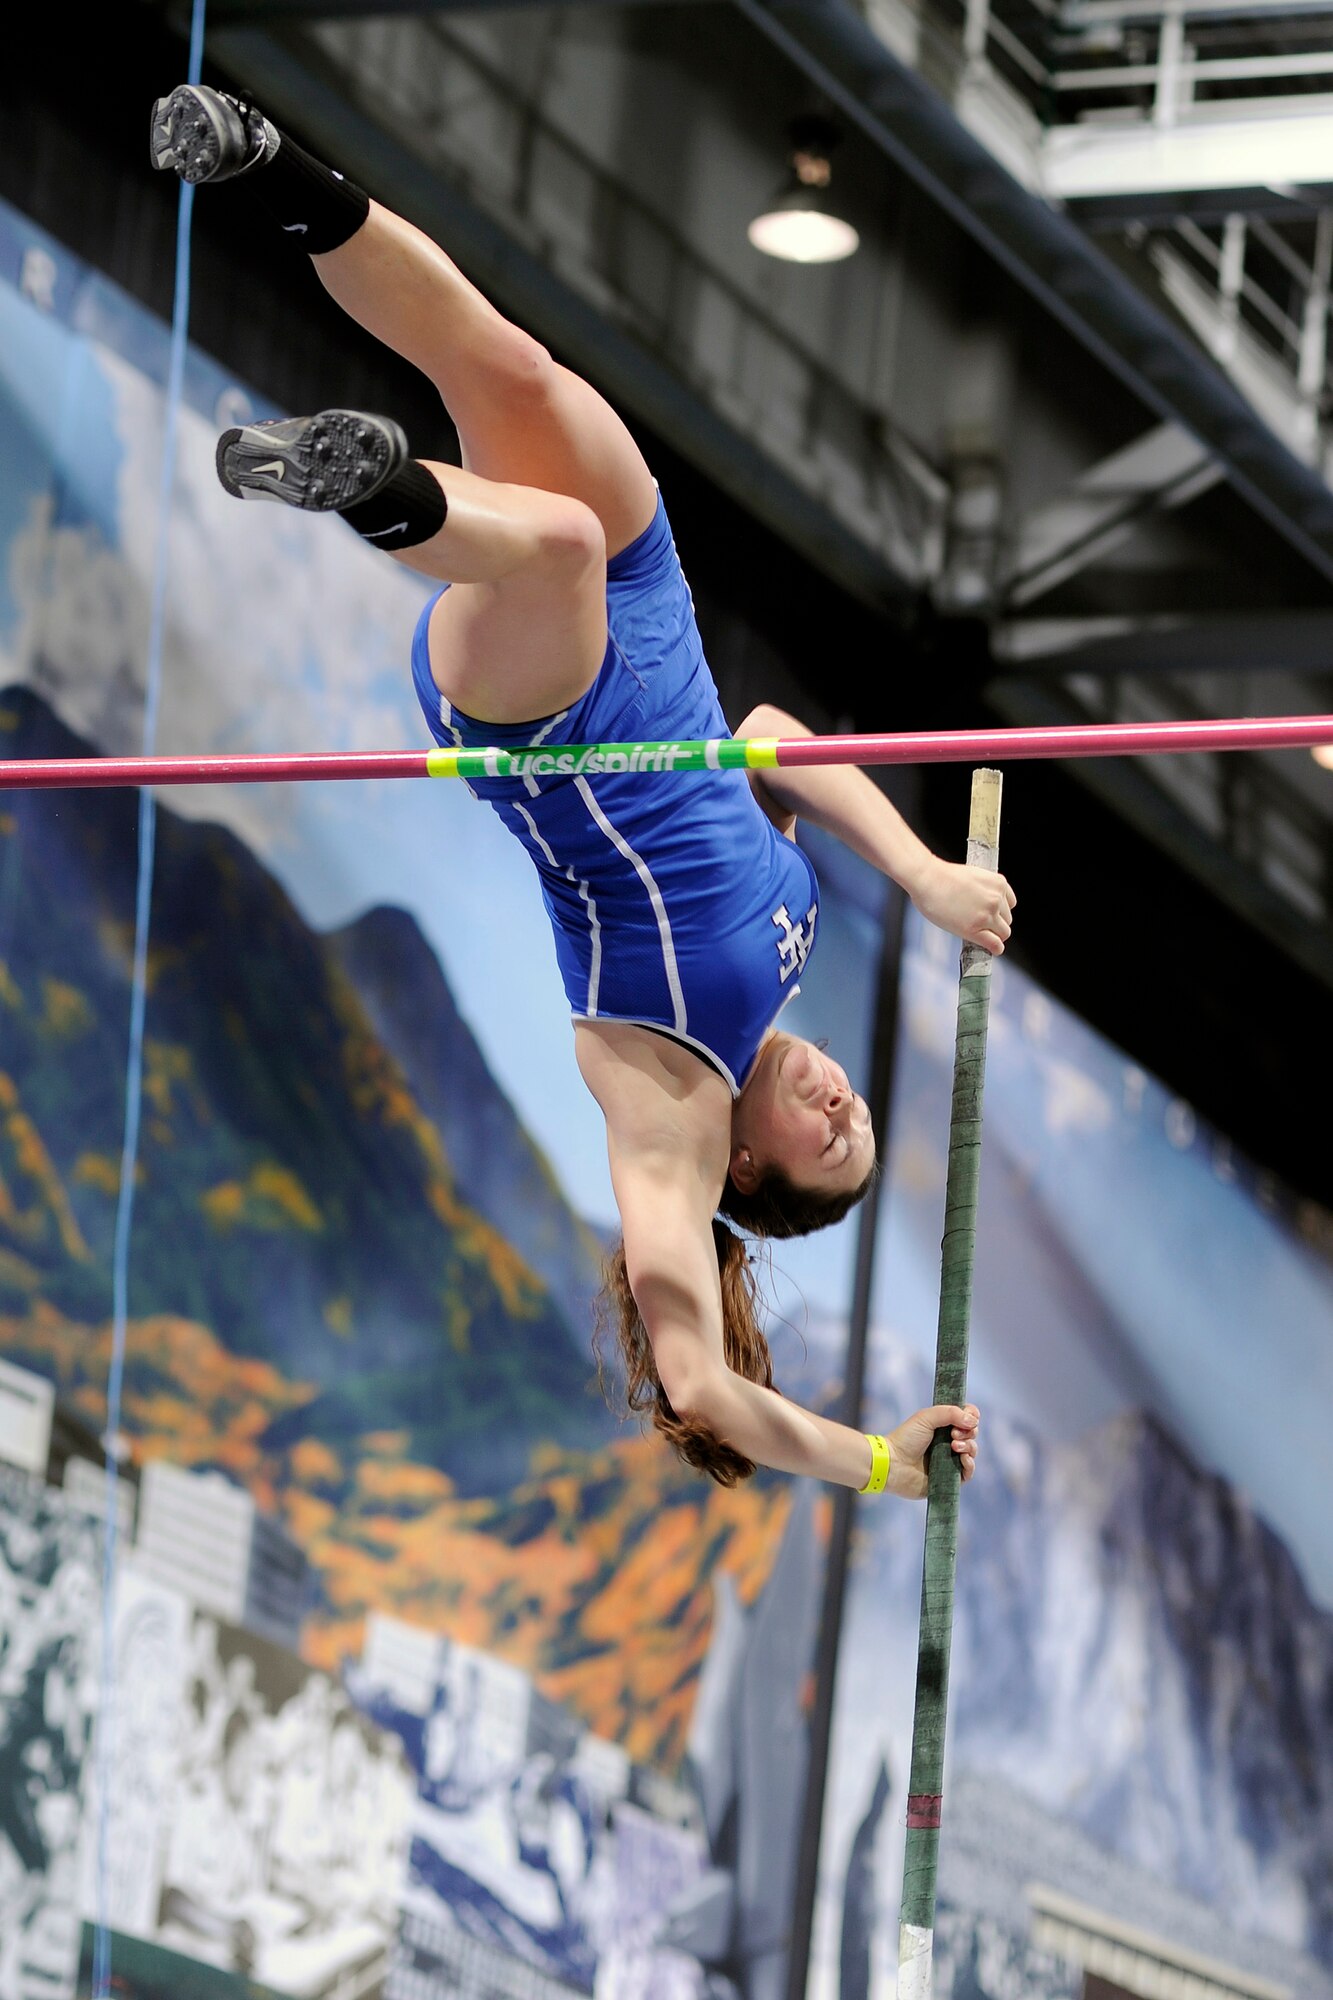 Jerni Self, a freshman, competes in the pole vault competition at the U.S. Air Force Academy’s 26th annual Air Force Invitational Track and Field meet at the Academy's Cadet Field House in Colorado Springs, Colo., Jan. 22, 2016. Self placed third with a vault of 11 feet 5 ¾ inches. (U.S. Air Force photo/Bill Evans) 